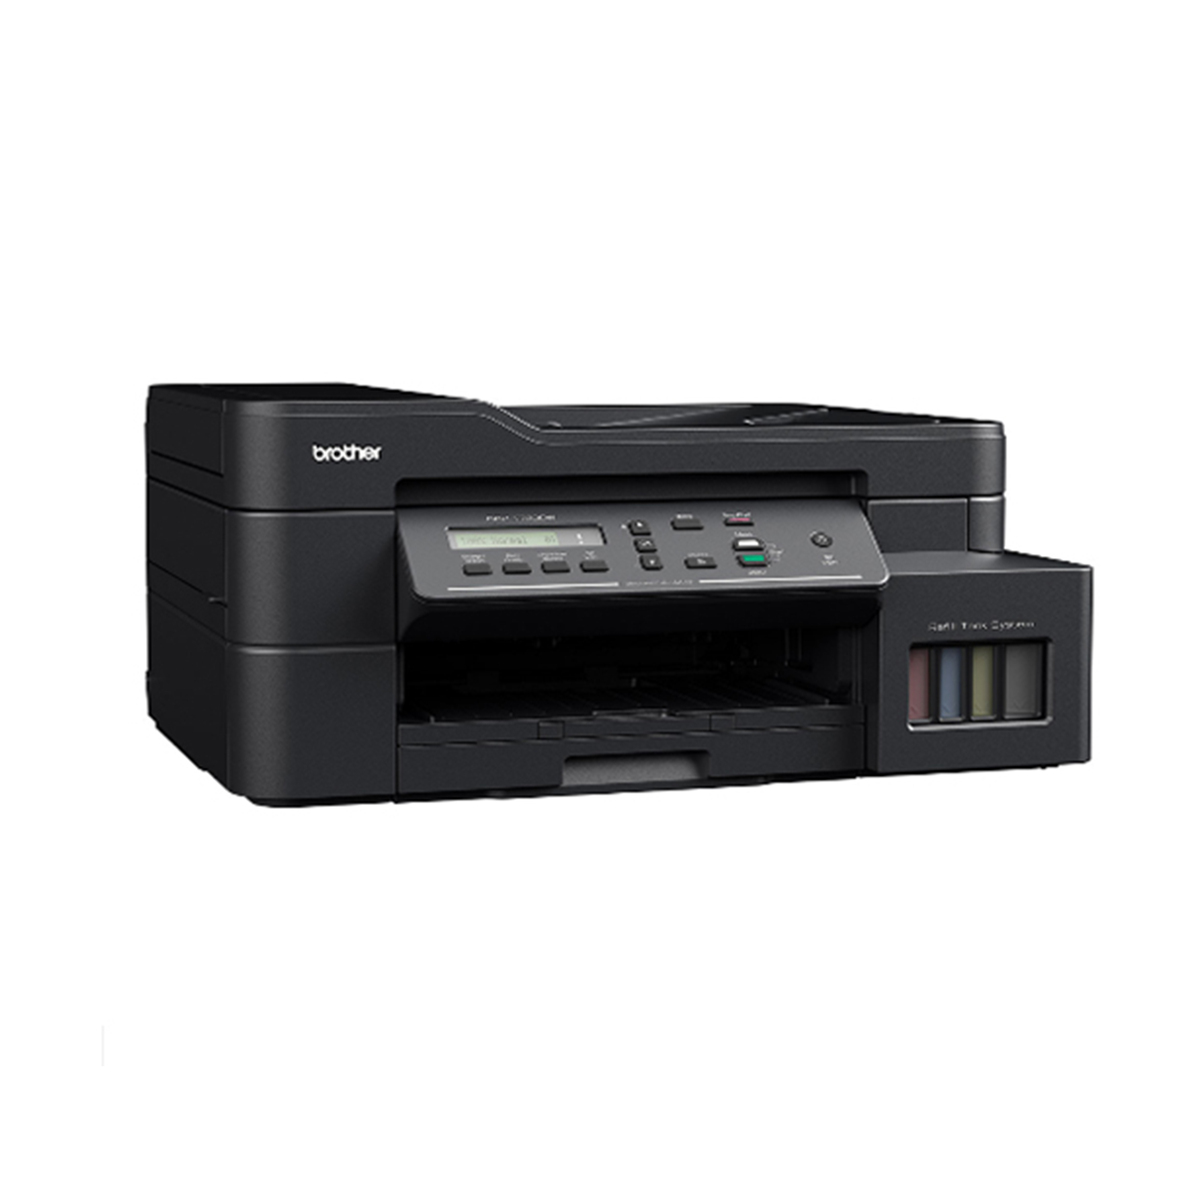 Brother DCP-T720DW Reliable Multifunction Printer